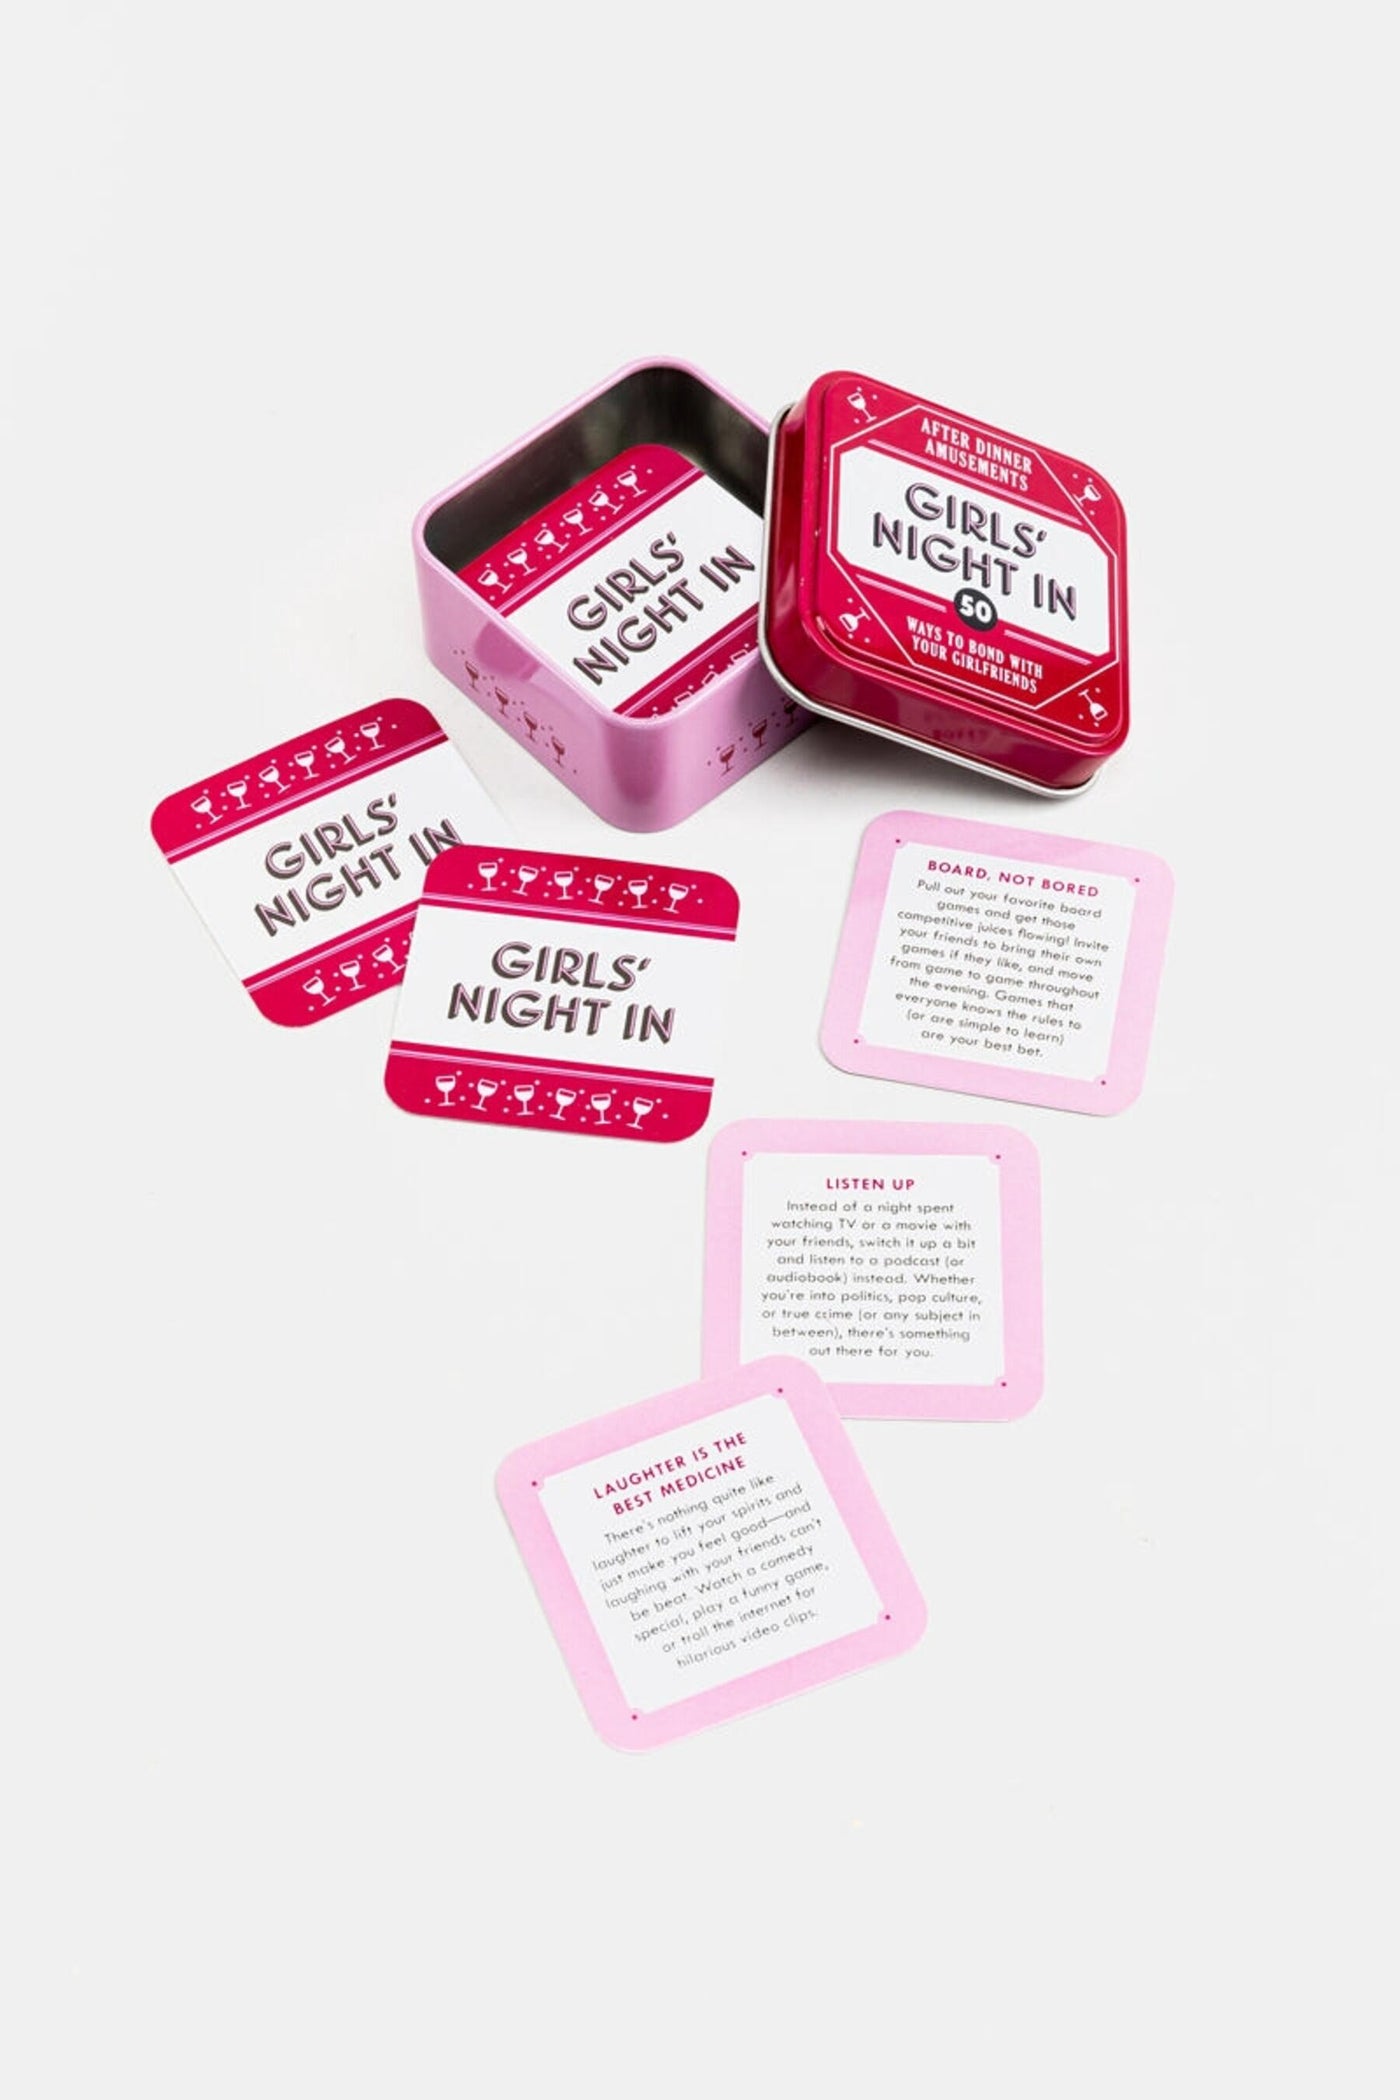 After Dinner Amusements: Girls Night In 50 Ways to Bond with Your Girlfriends